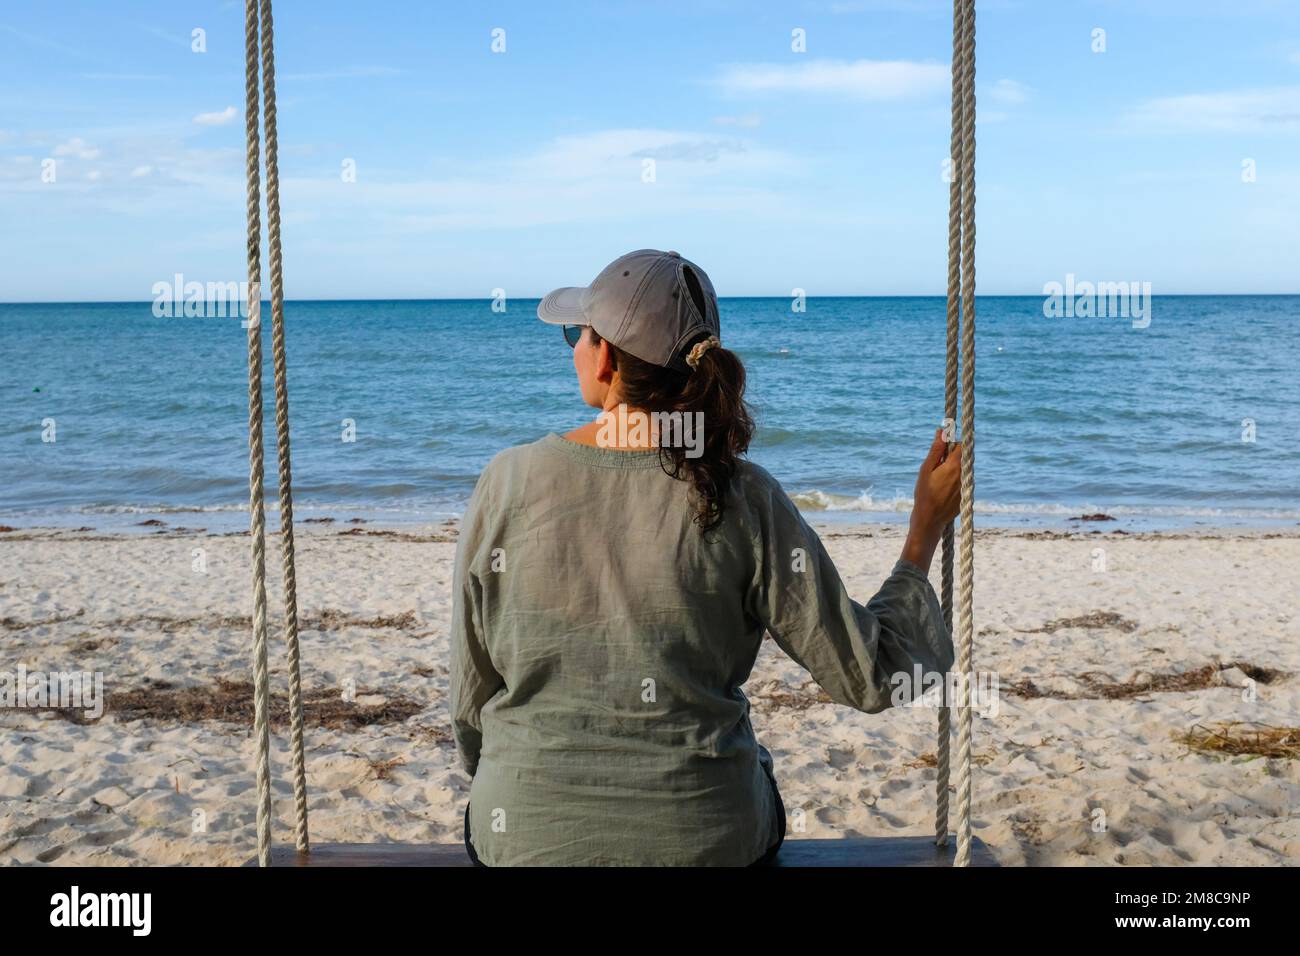 Woman looking at the ocean Banque D'Images